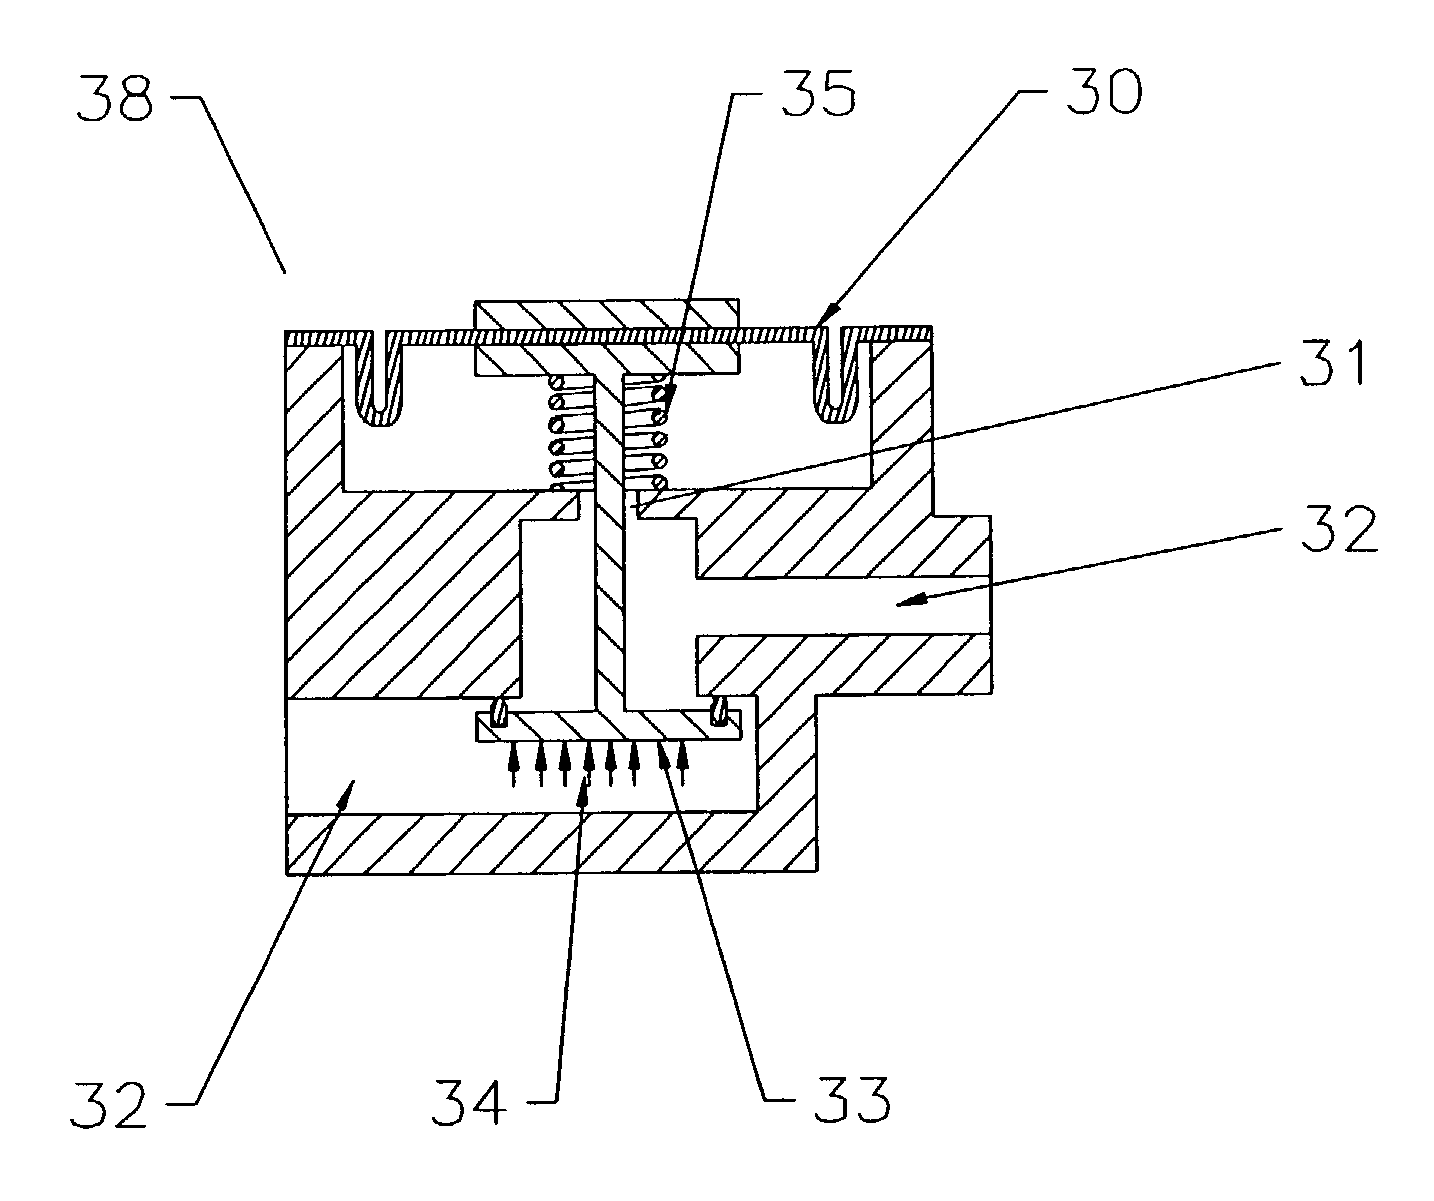 Interventional procedure drive and control system